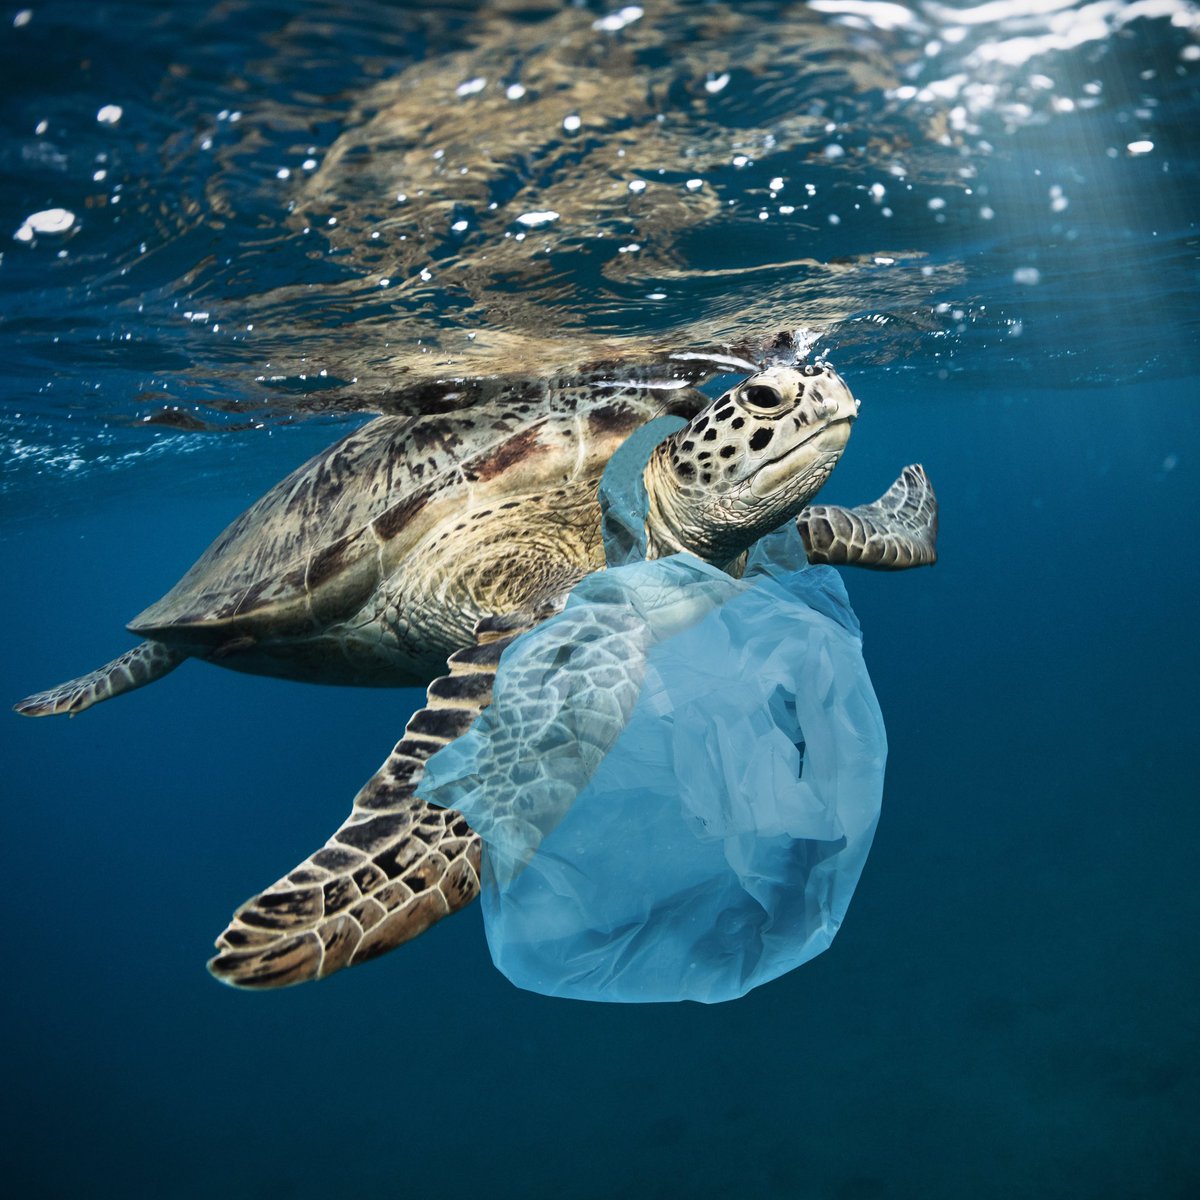 Plastic bags are only used for about 12 minutes, yet they linger for up to 1,000 years, wreaking havoc on our environment. 🌎

#PlasticFreeFuture #SustainableLiving #plastic #sandsoftime #sea #ocean #oceanlover #oceanplastics